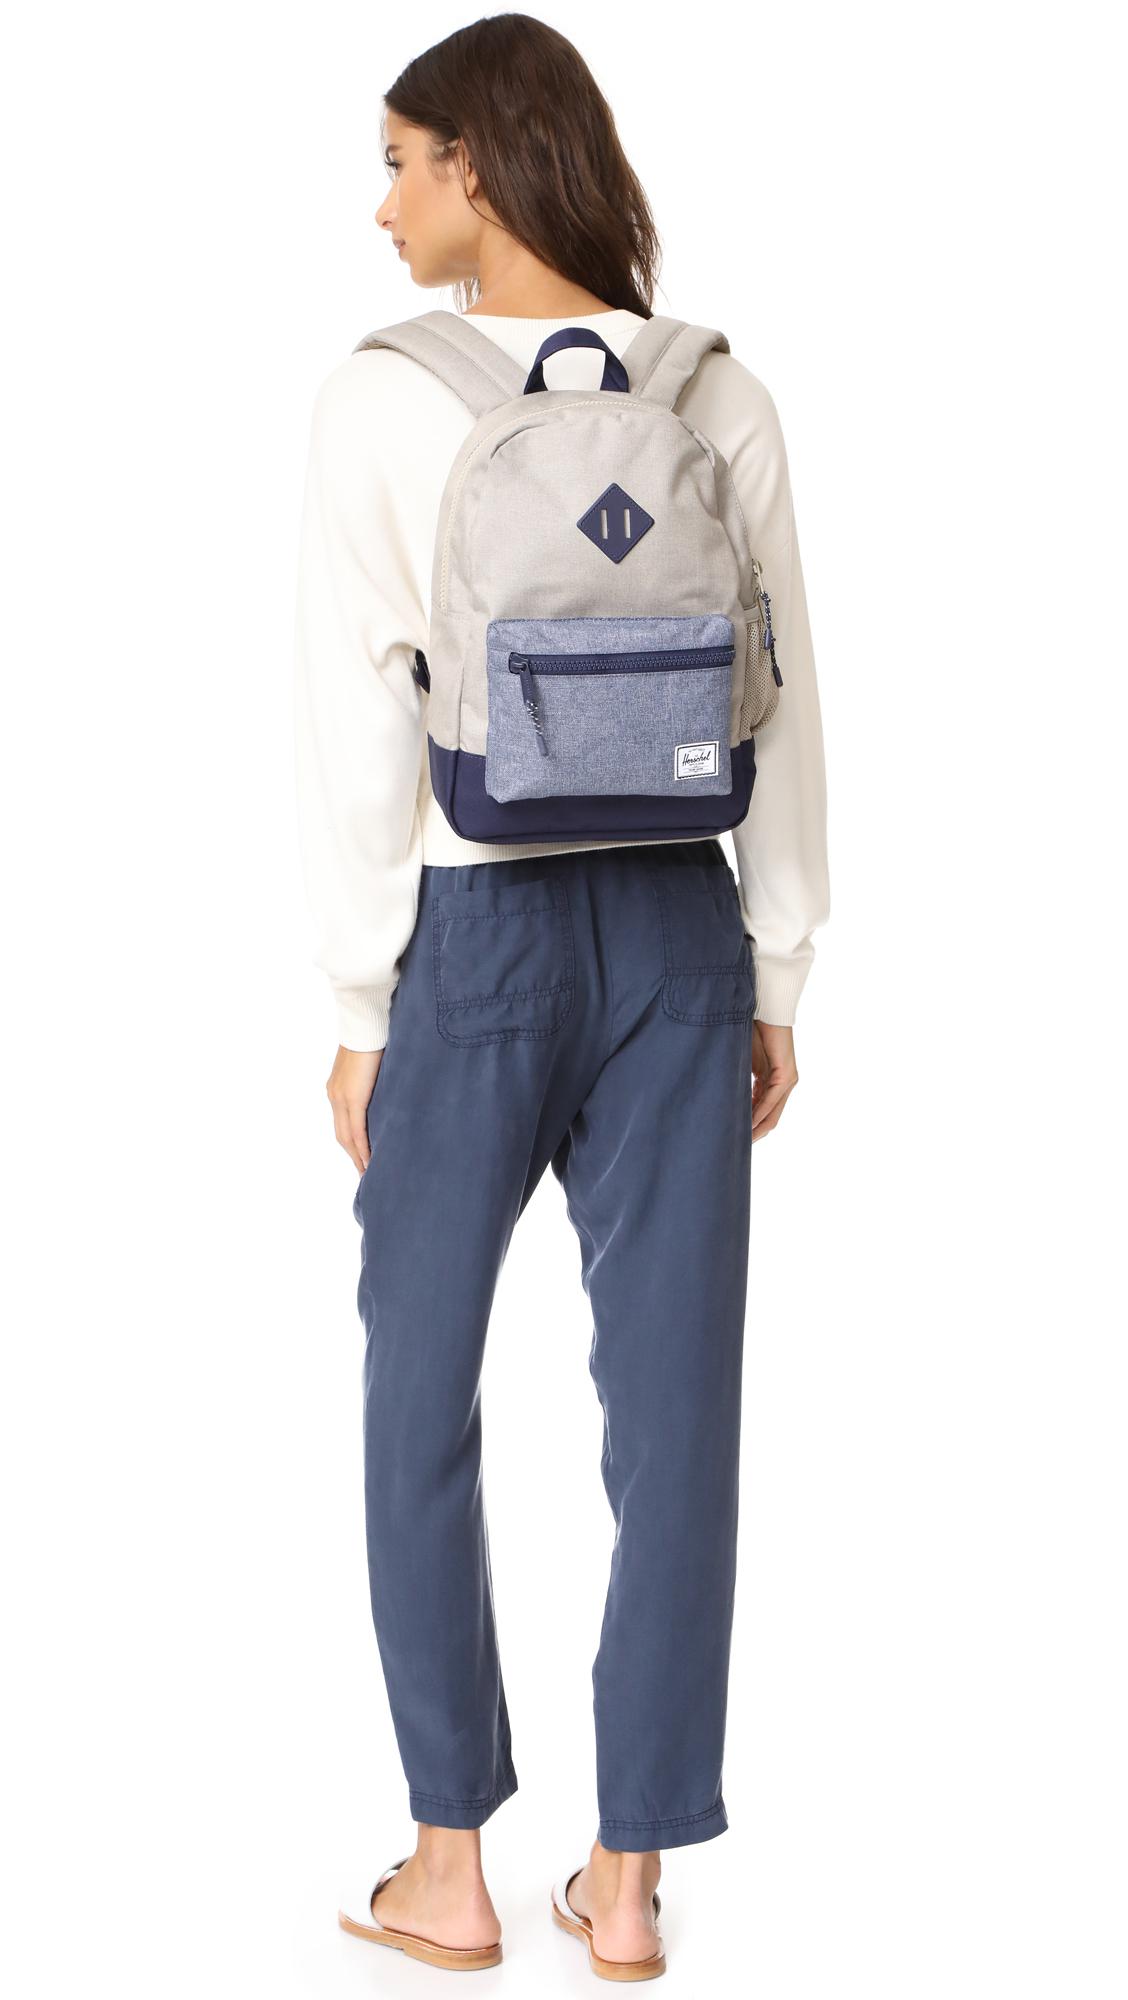 Herschel Supply Co. Heritage Youth Backpack in Blue | Lyst